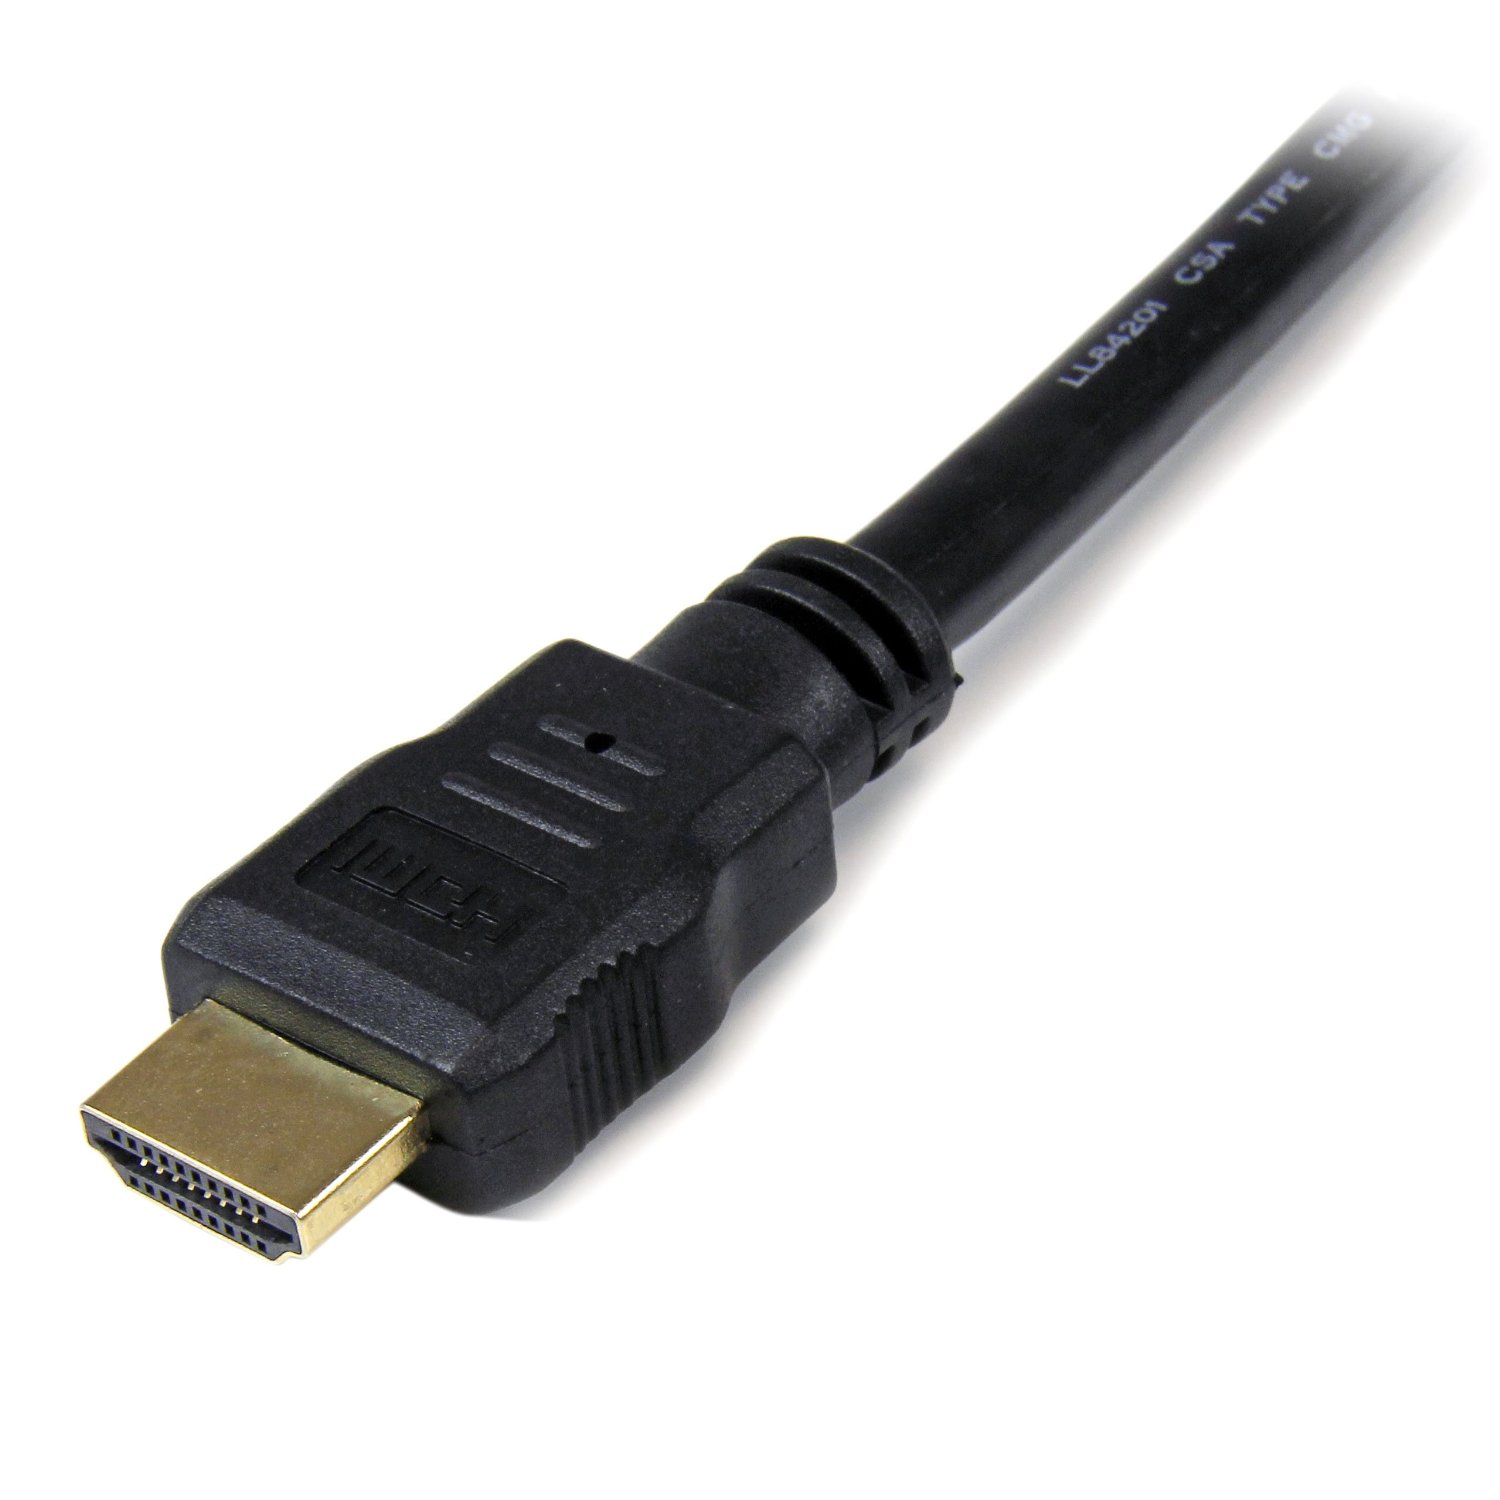 a-technology hdmi to vga cable 3ft (1m) 1080p-gold plated-active video  adapter-hdmi digital to vga converter cable-support notebook-pc-dvd-player  laptop-tv-projector-monitor etc 